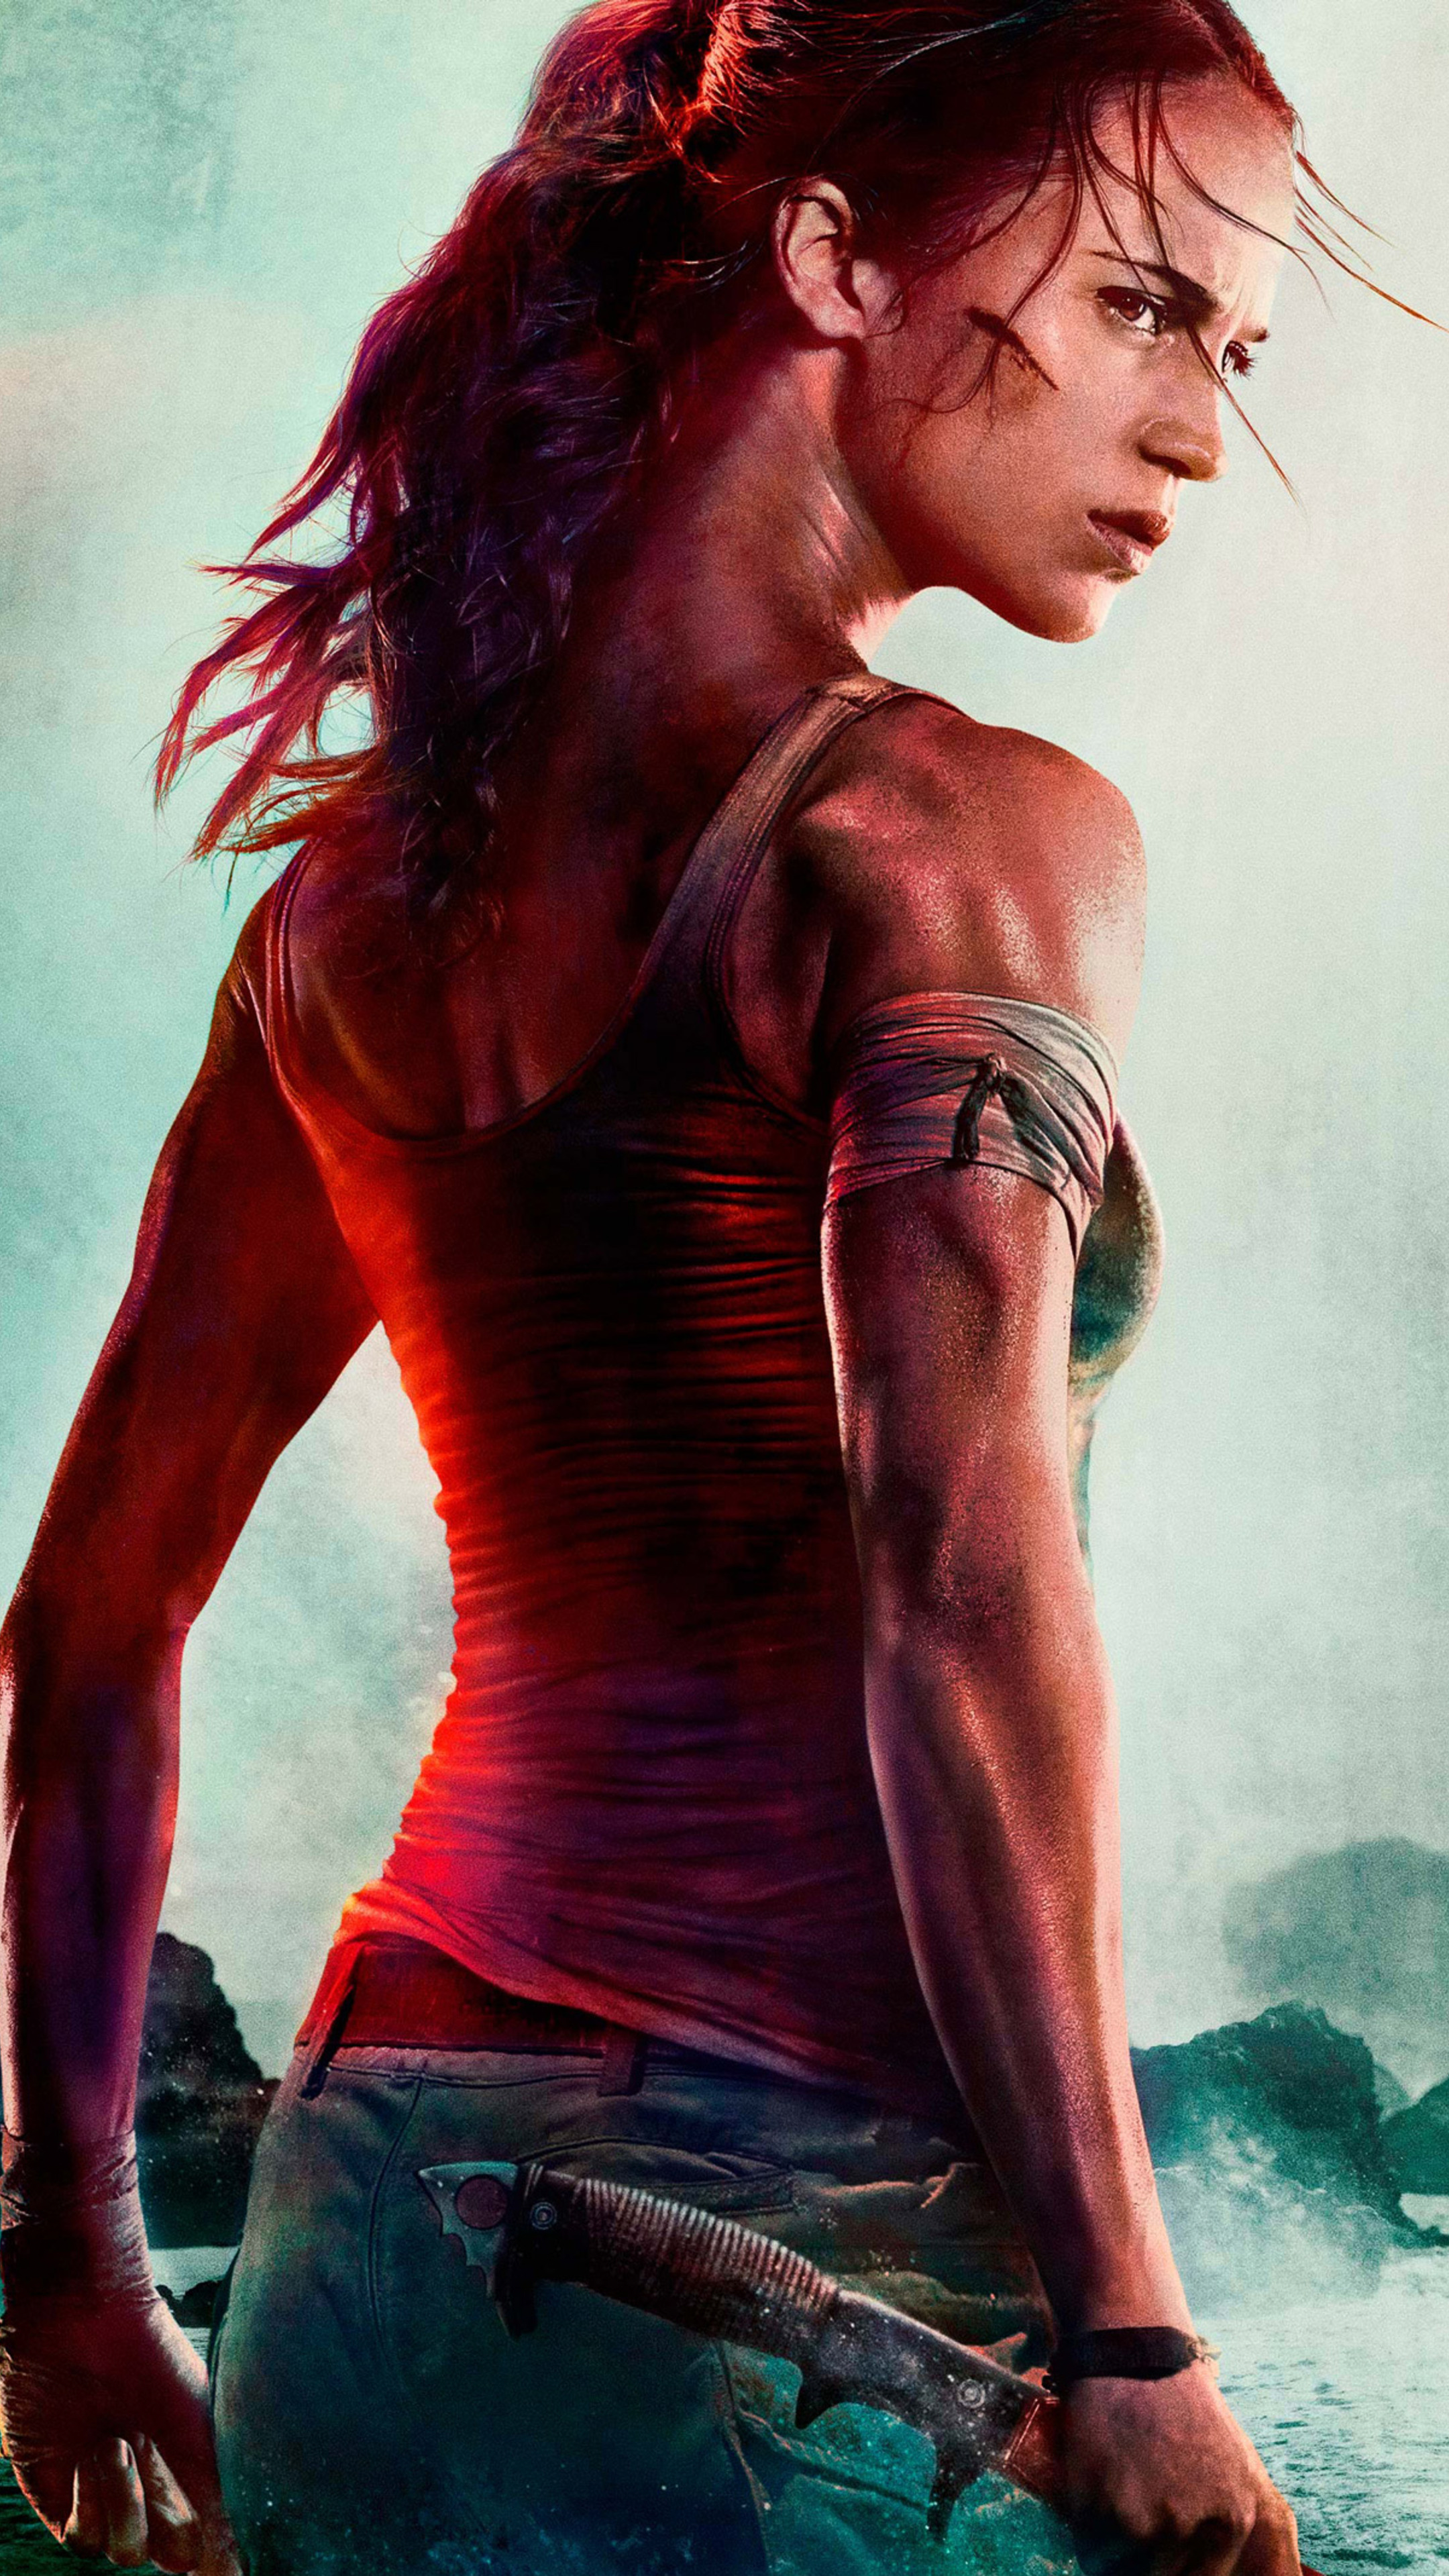 Lara Croft (Movie): Hoping to solve the mystery of her father's disappearance. 2160x3840 4K Background.